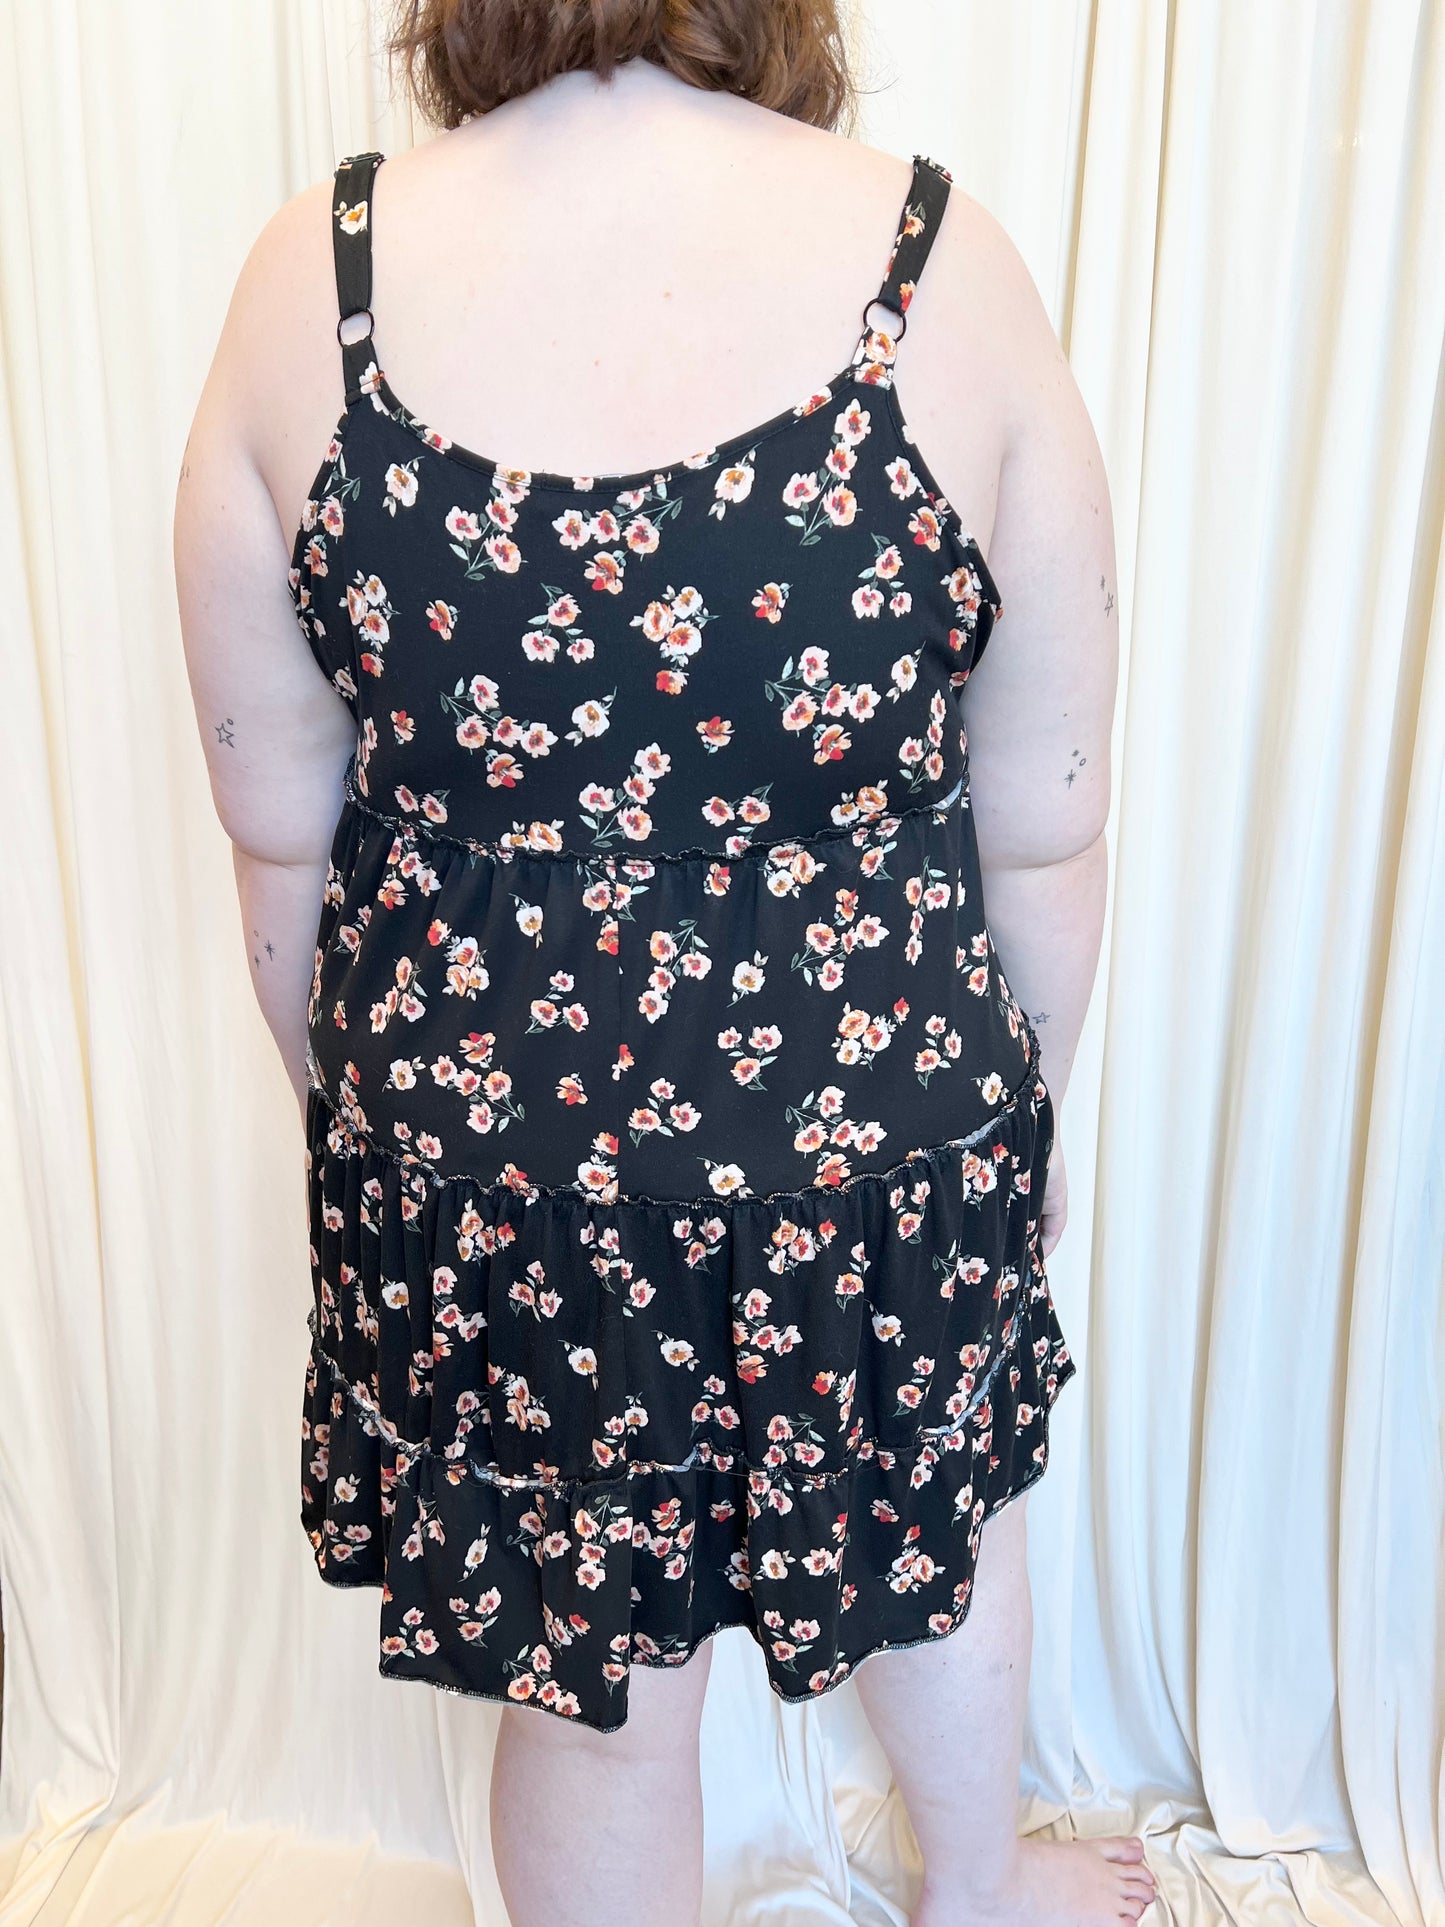 Black Tiered Floral Dress - 2X-Large